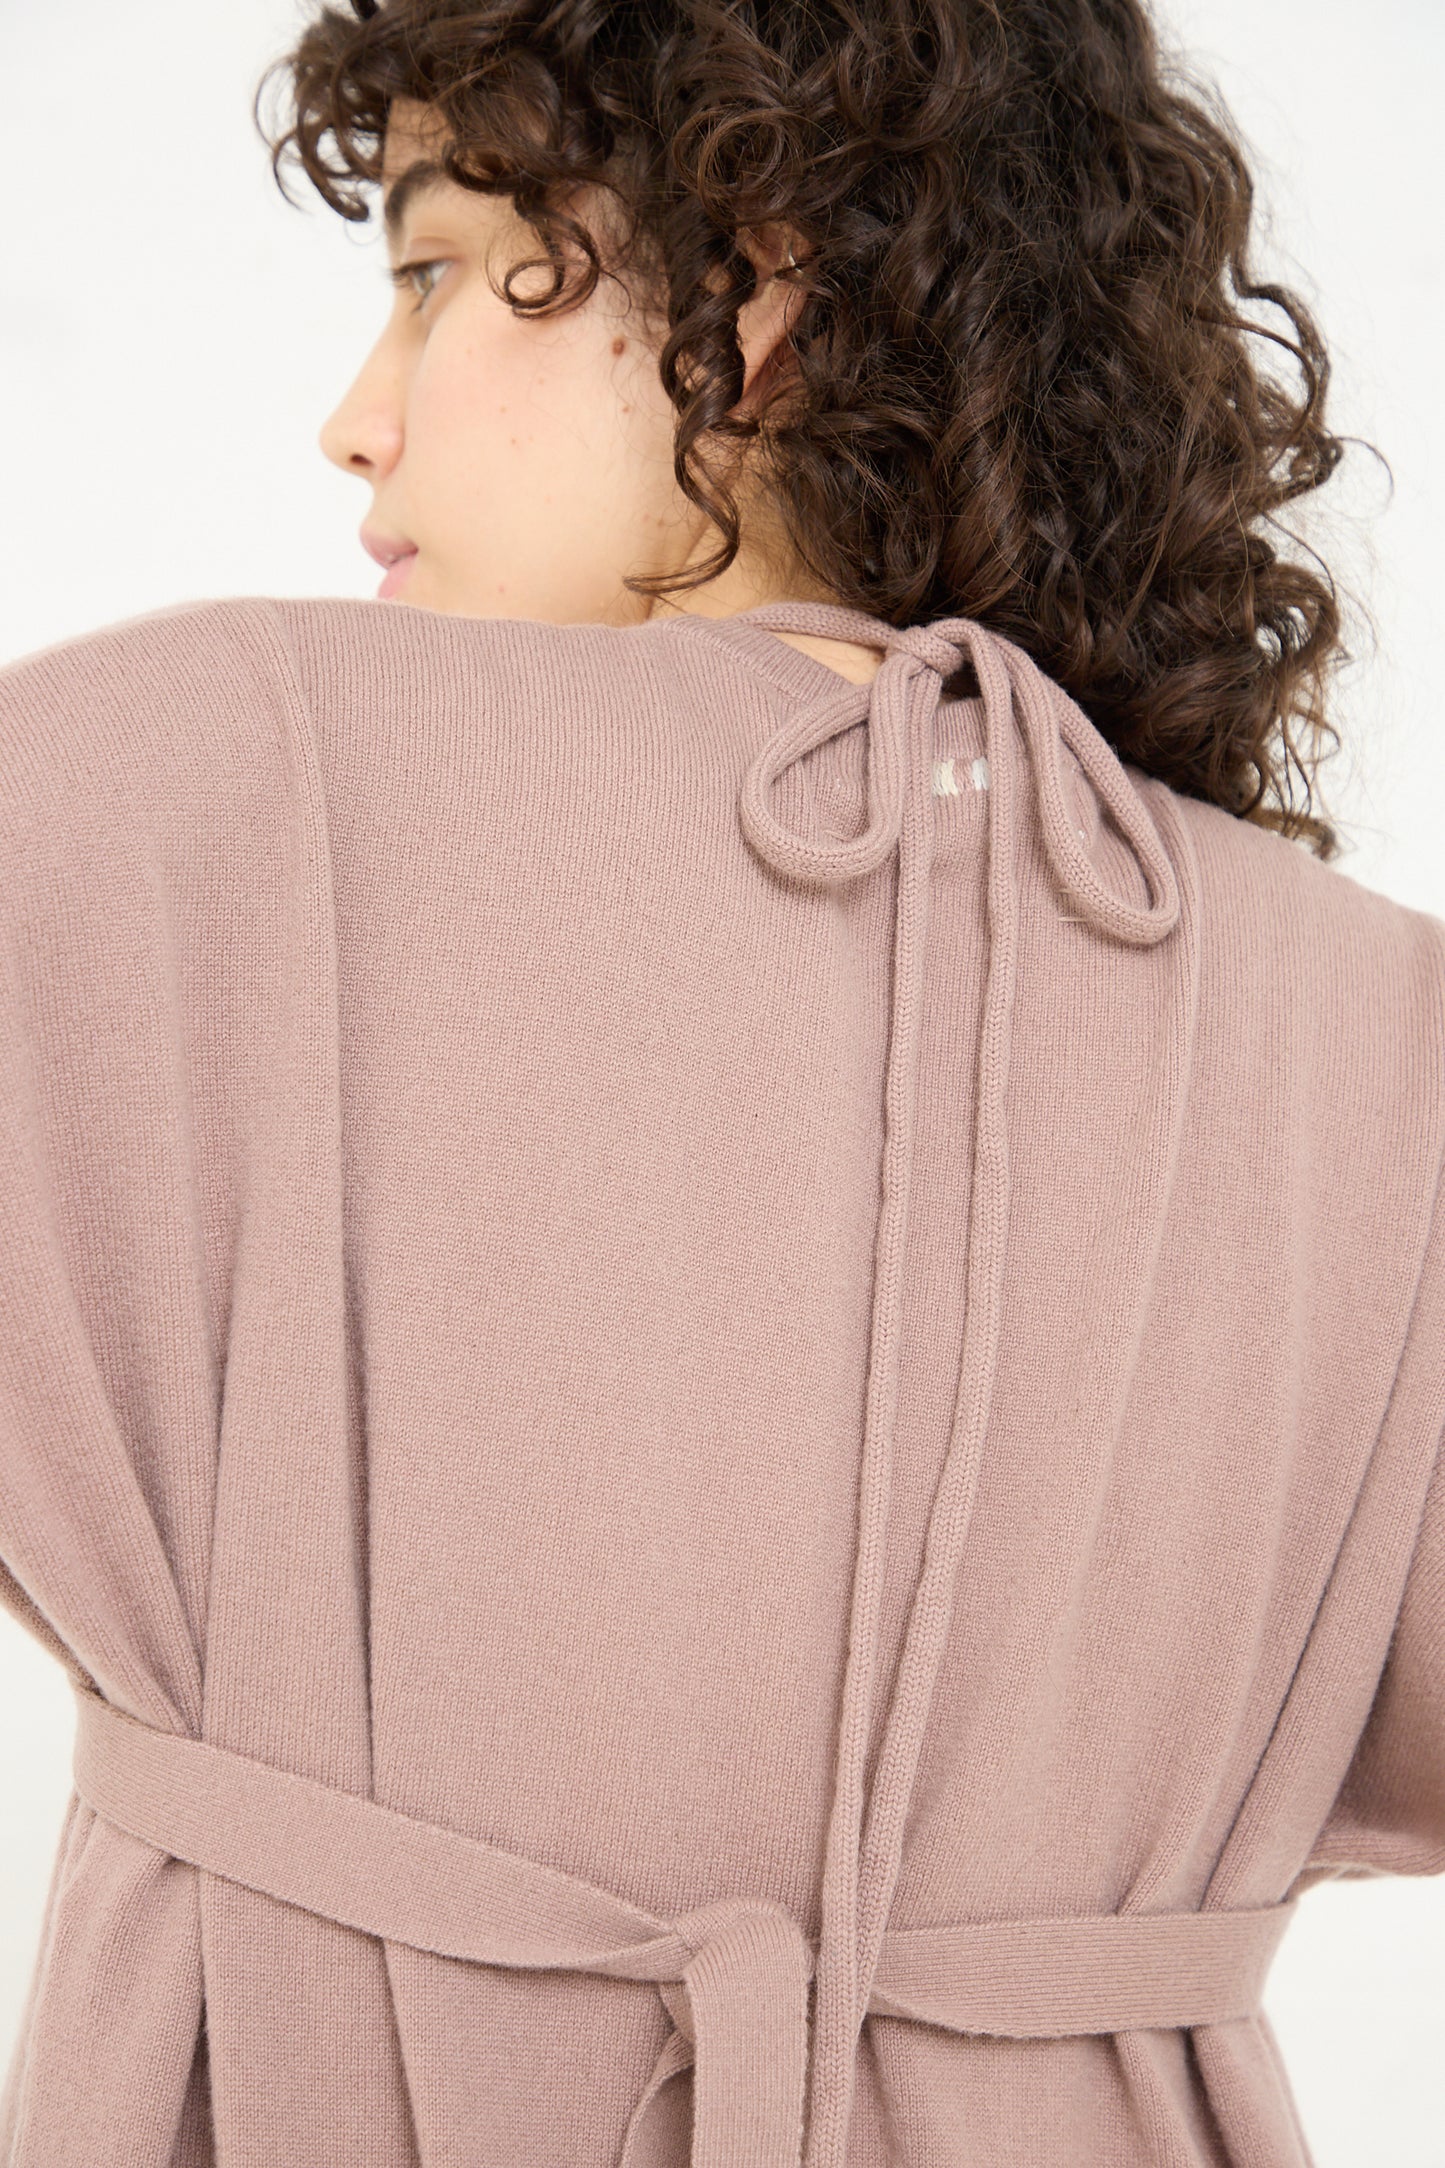 The woman is wearing an Extreme Cashmere No. 327 Bralette in Clay, showing off the back view.